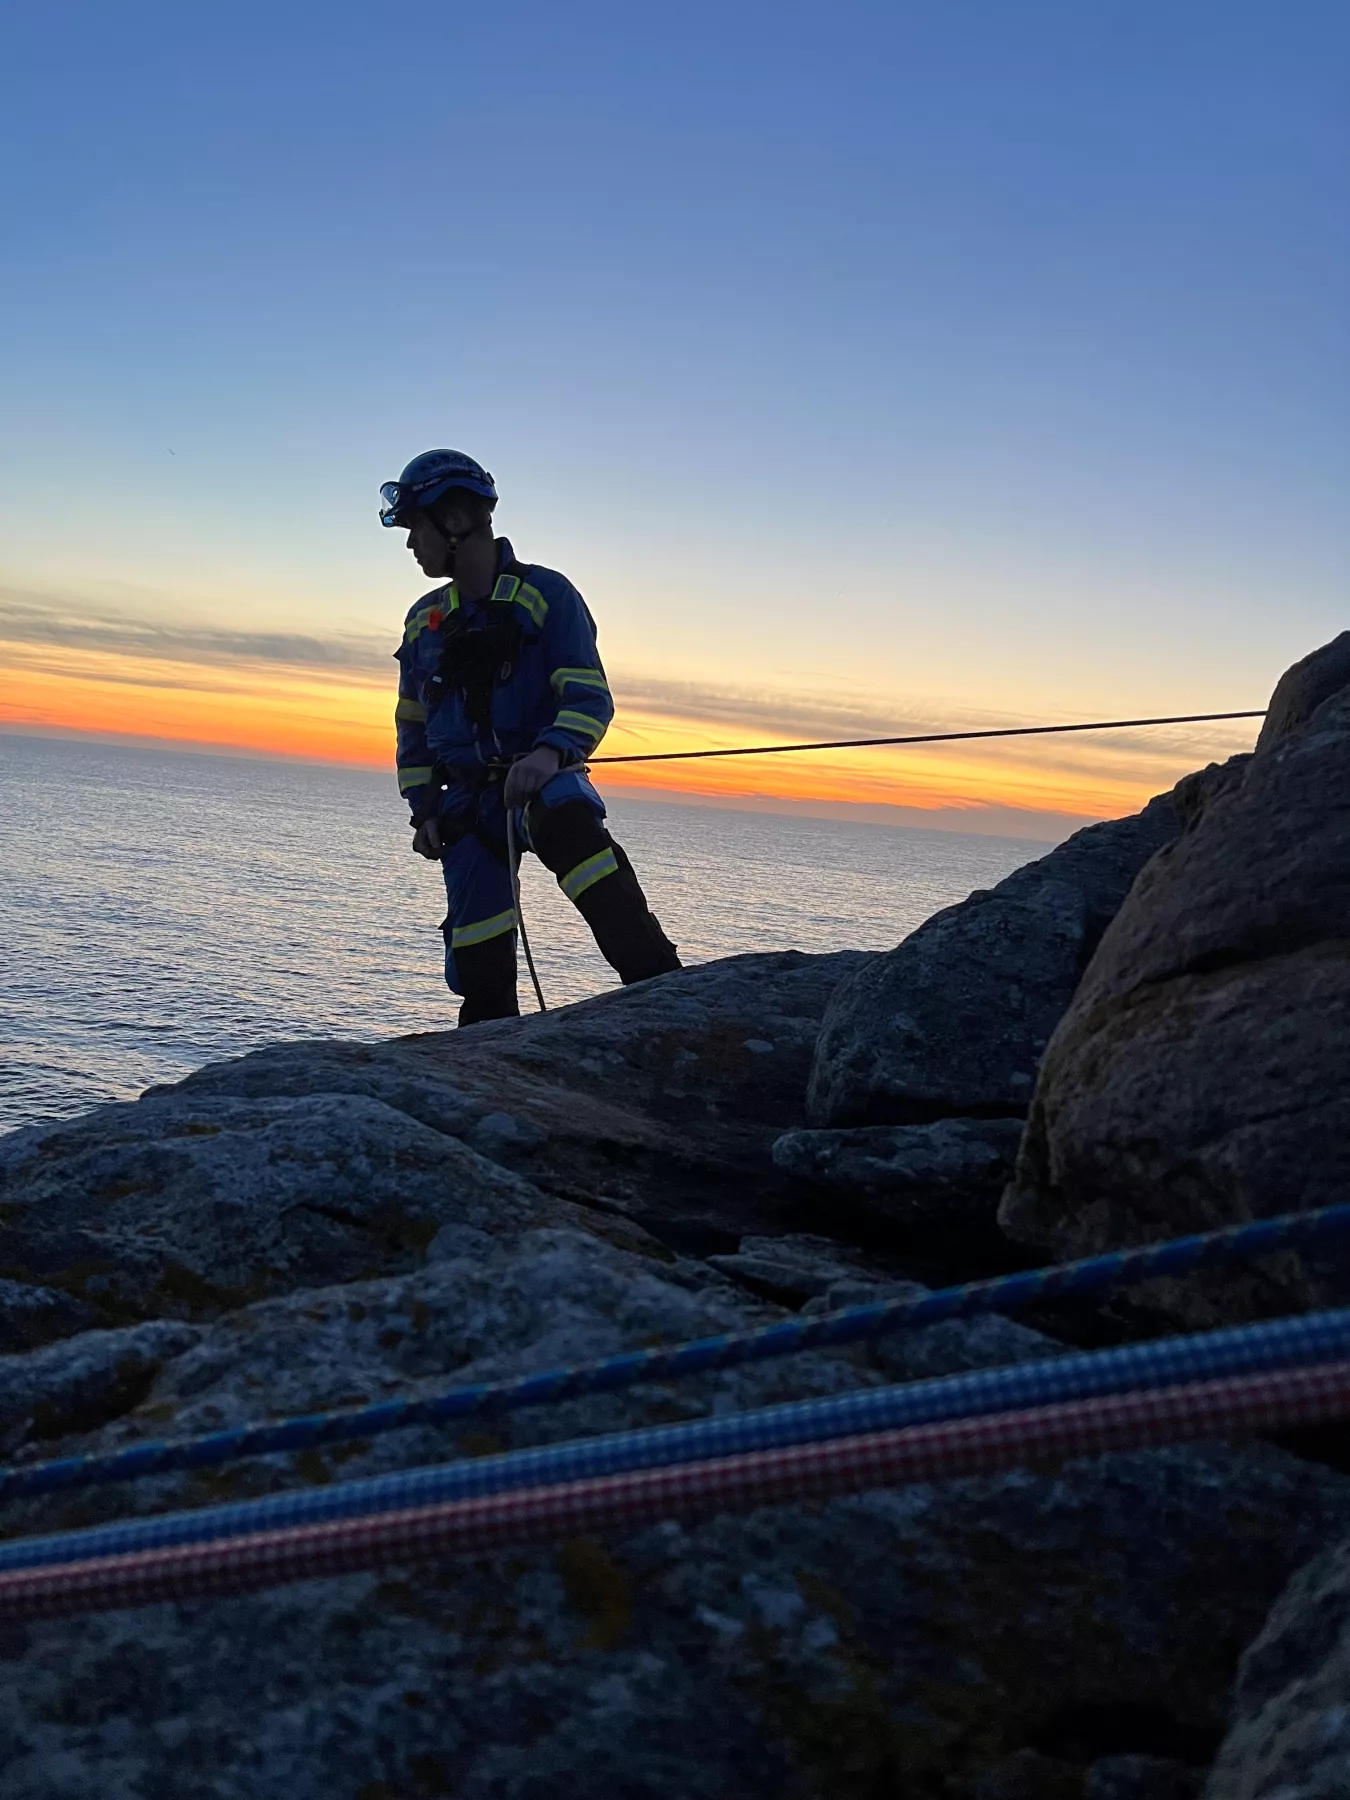 Coastguard rescue officer stands on edge of cliff secure in his rope harness looking down below